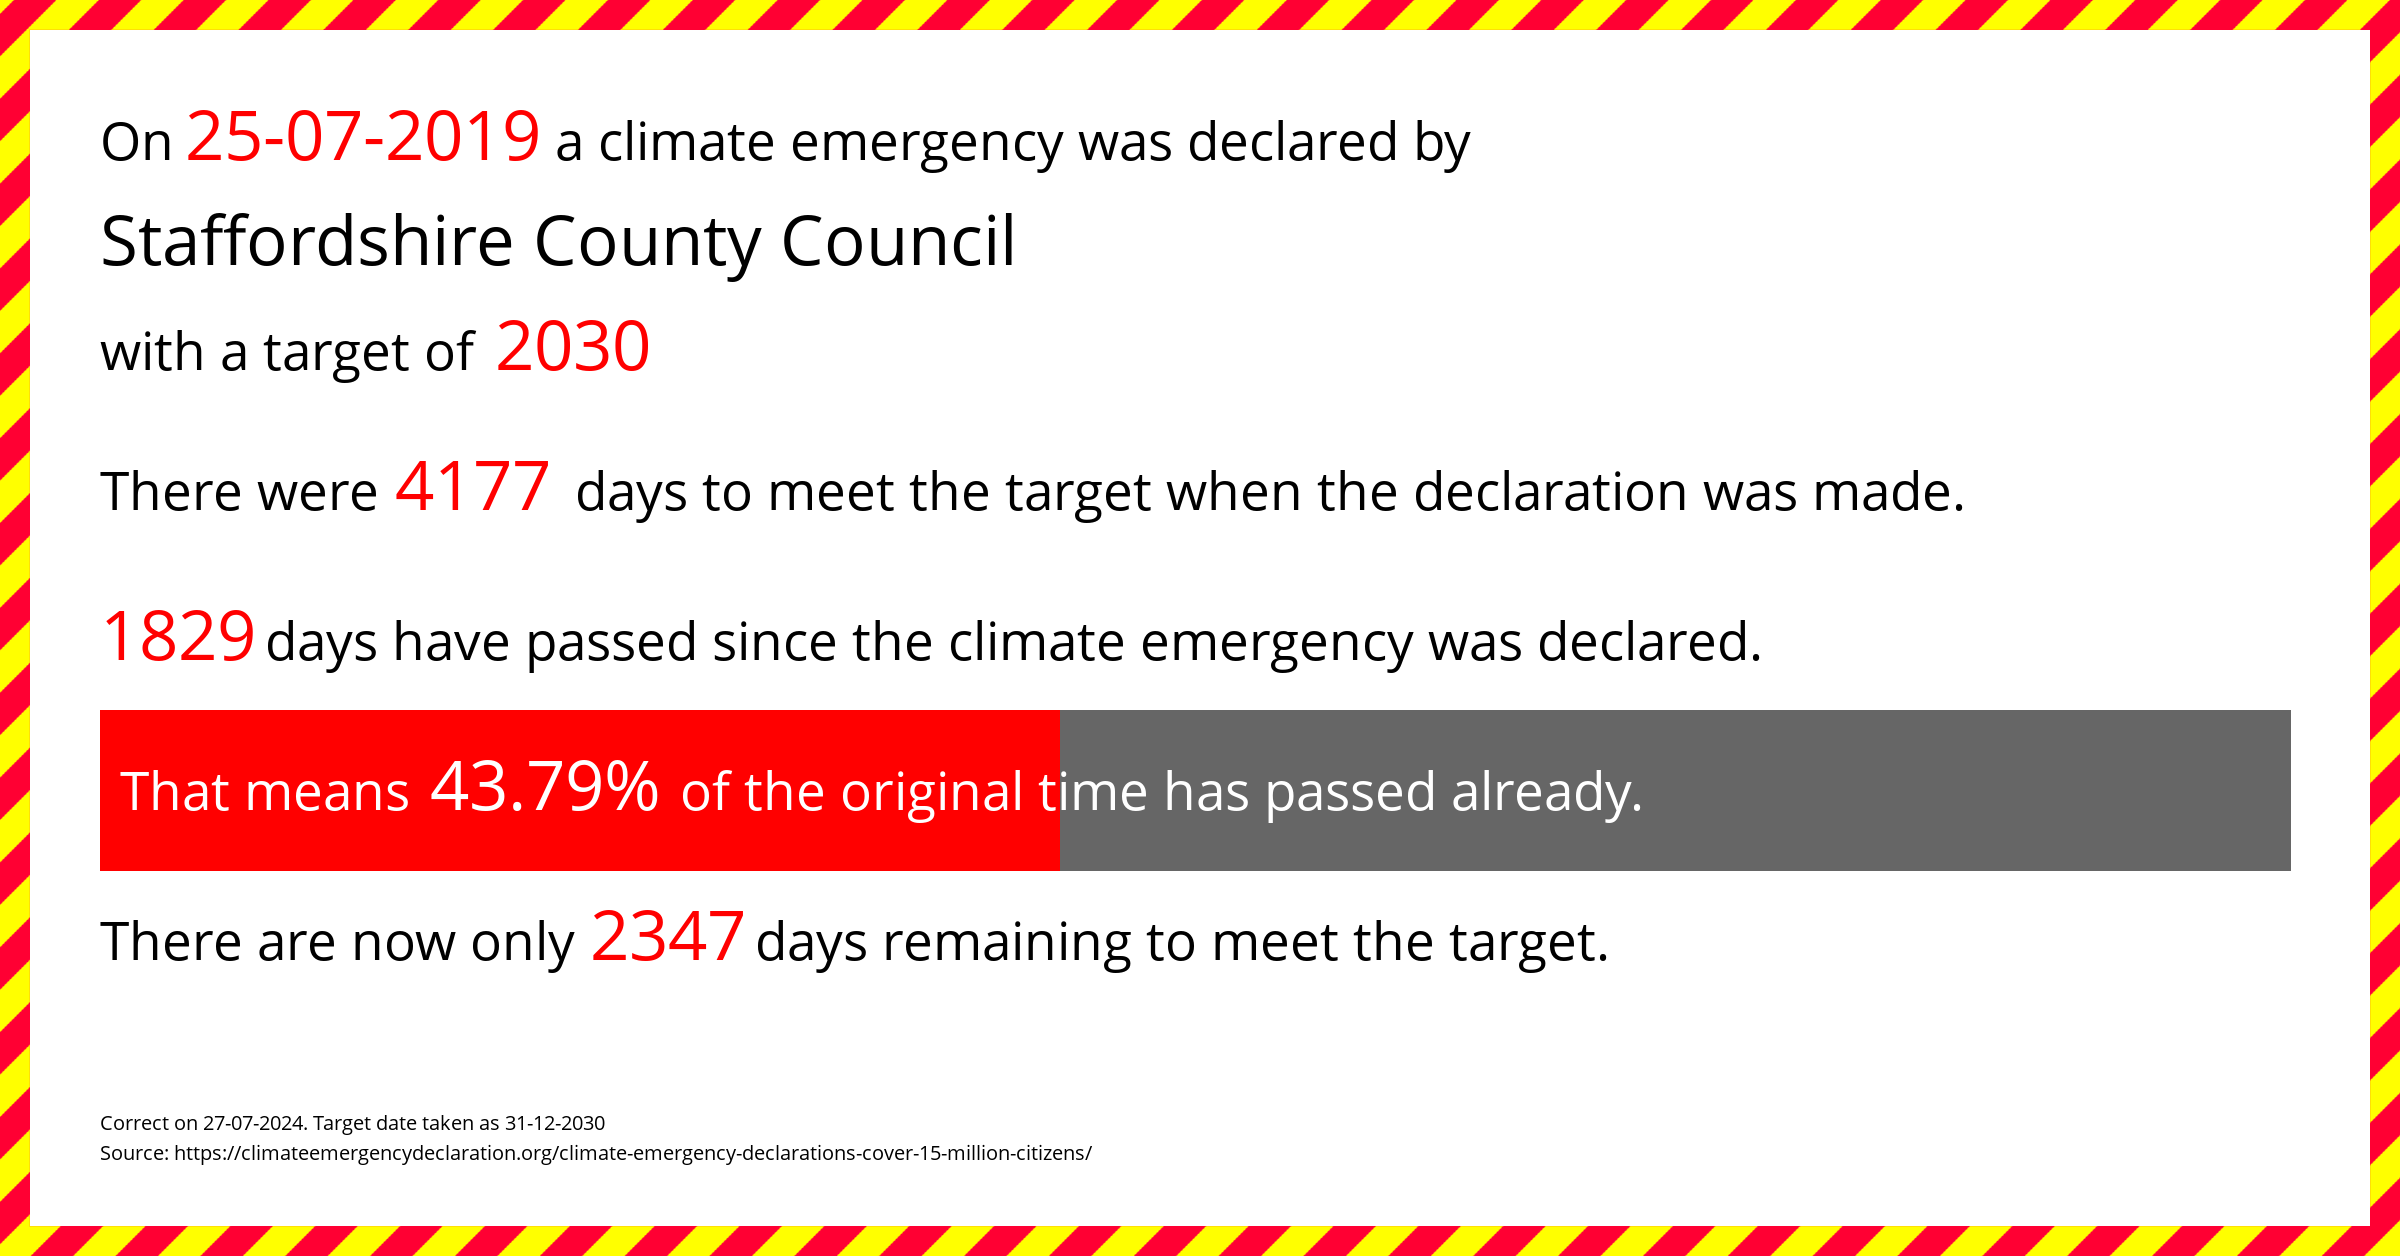 Staffordshire County Council declared a Climate emergency on Thursday 25th July 2019, with a target of 2030.